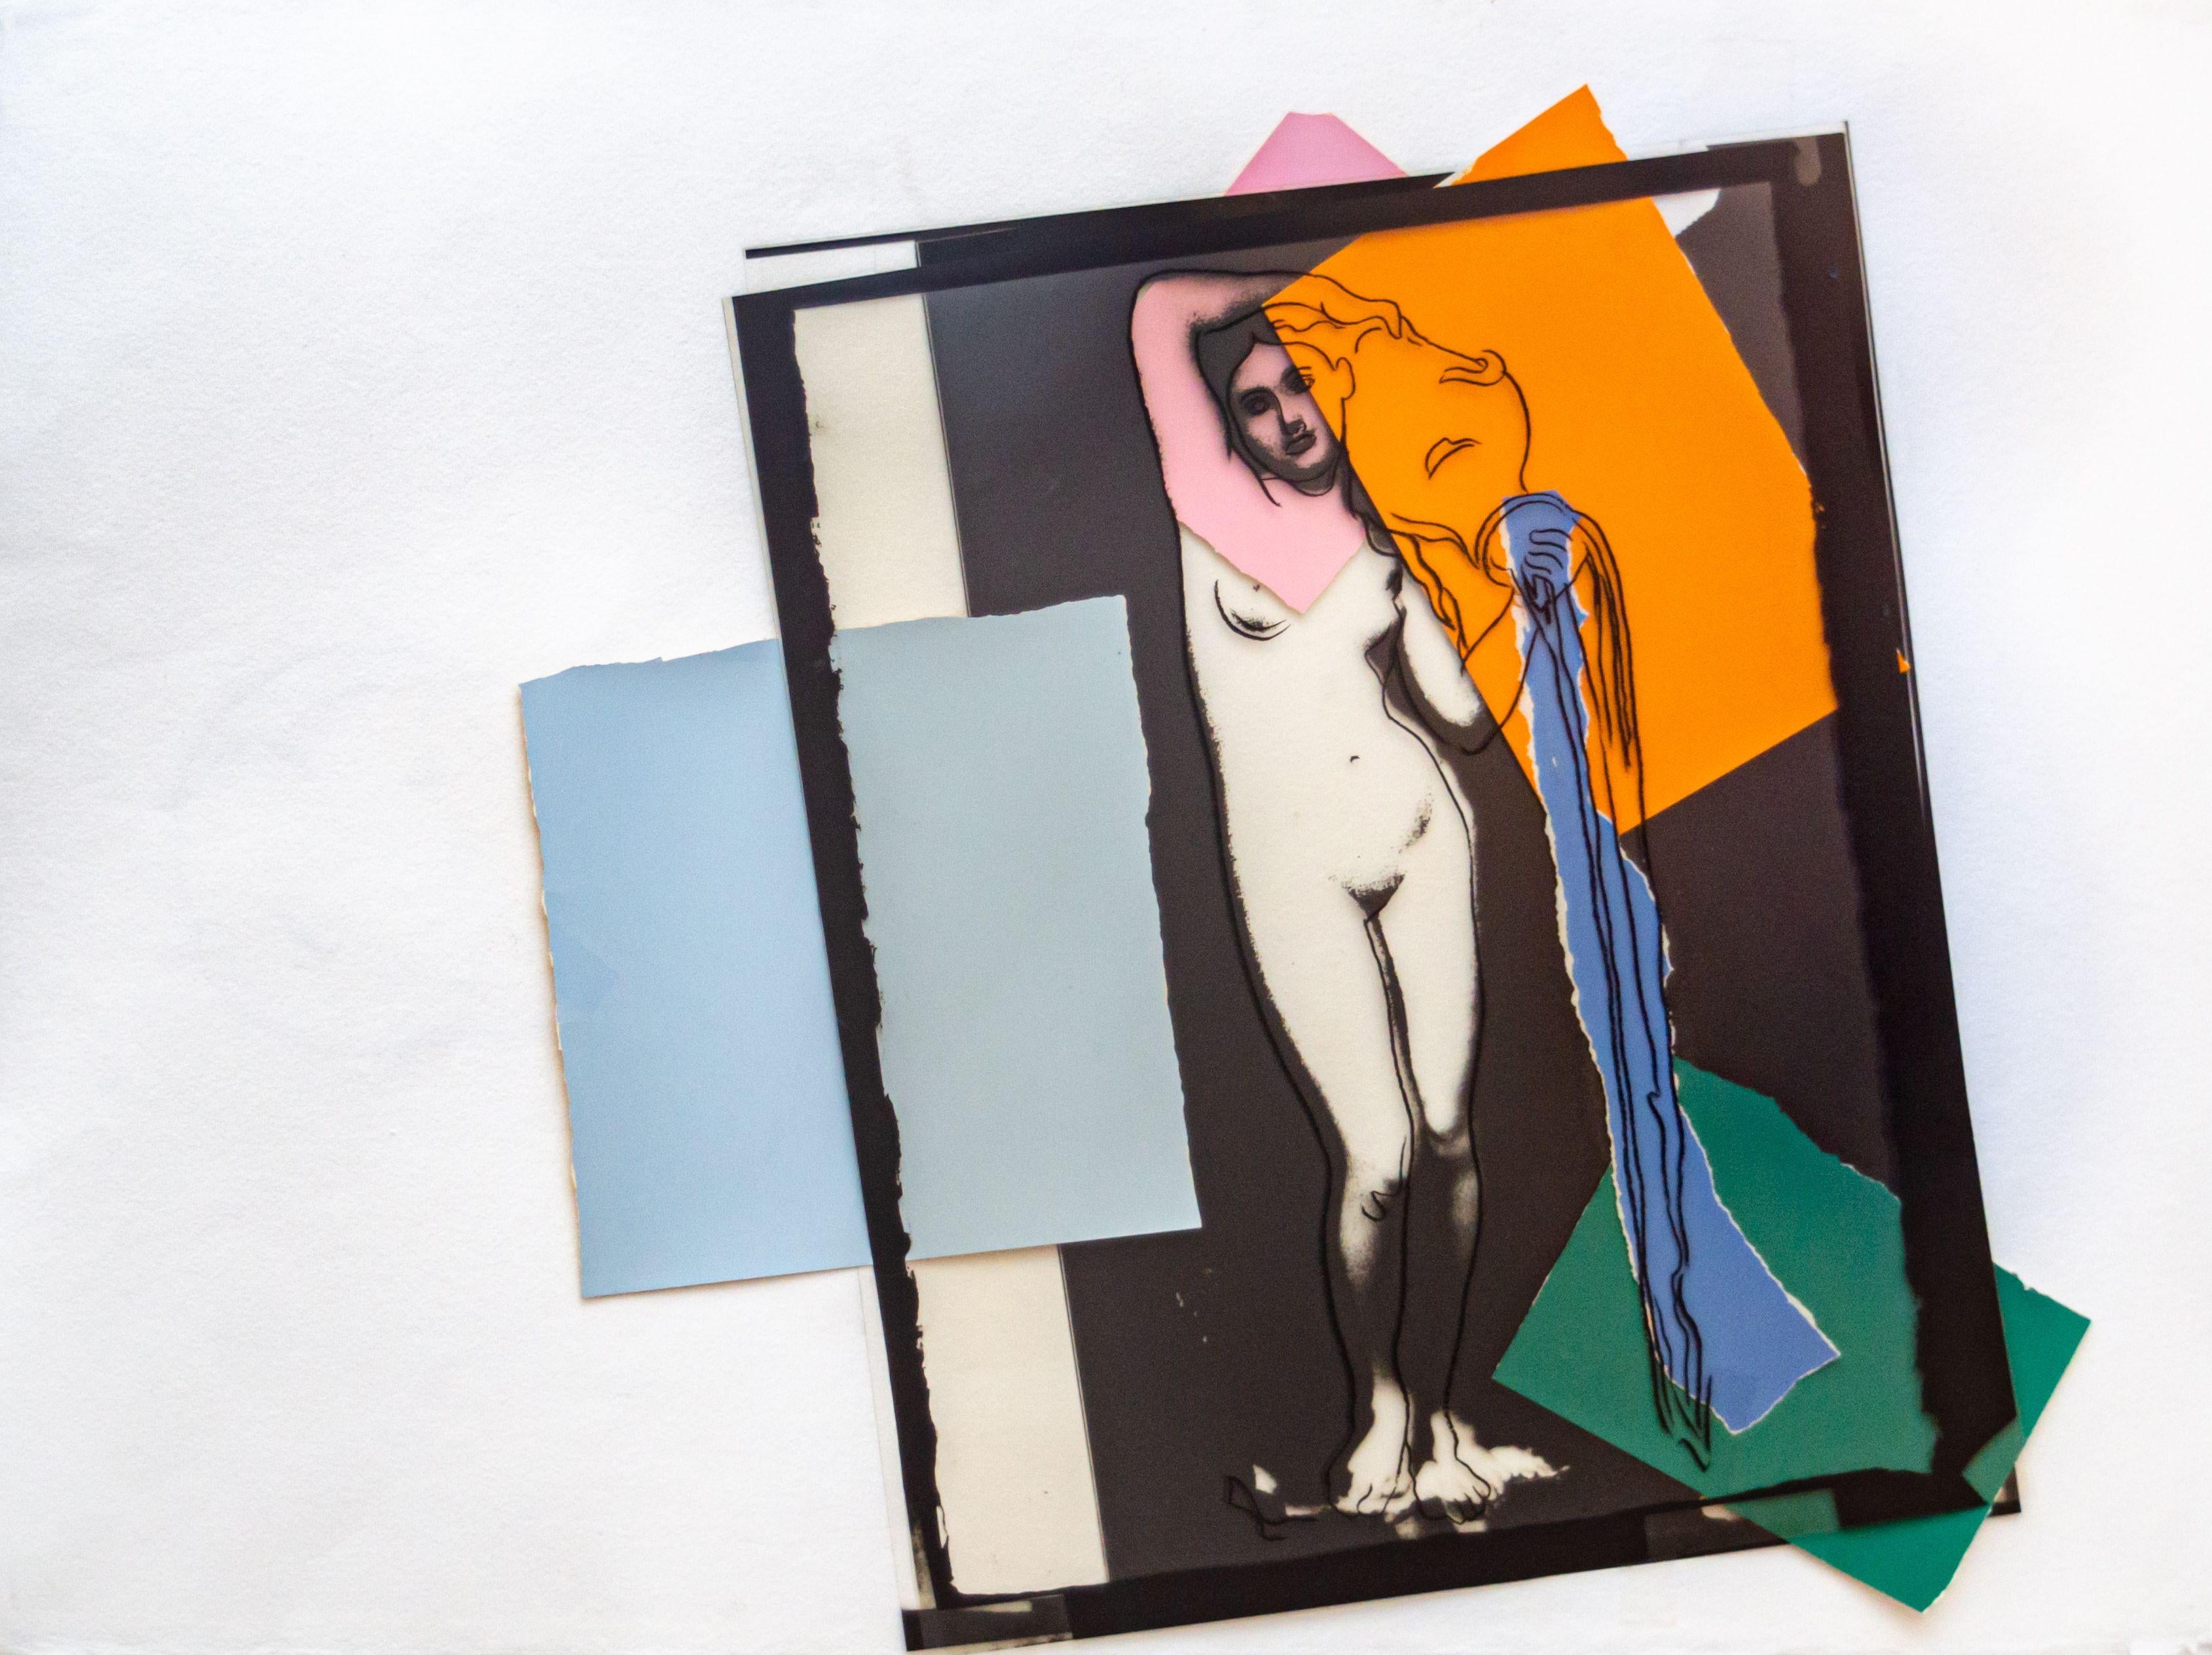 ANDY WARHOL (1928-1987)

Andy Warhol’s dynamic collage 'Female Water Bearer' is a screenprint on acetate and colored graphic art collage on HMP paper. It is stamped by the Warhol's Estate on the verso. This print is unnumbered from an unknown